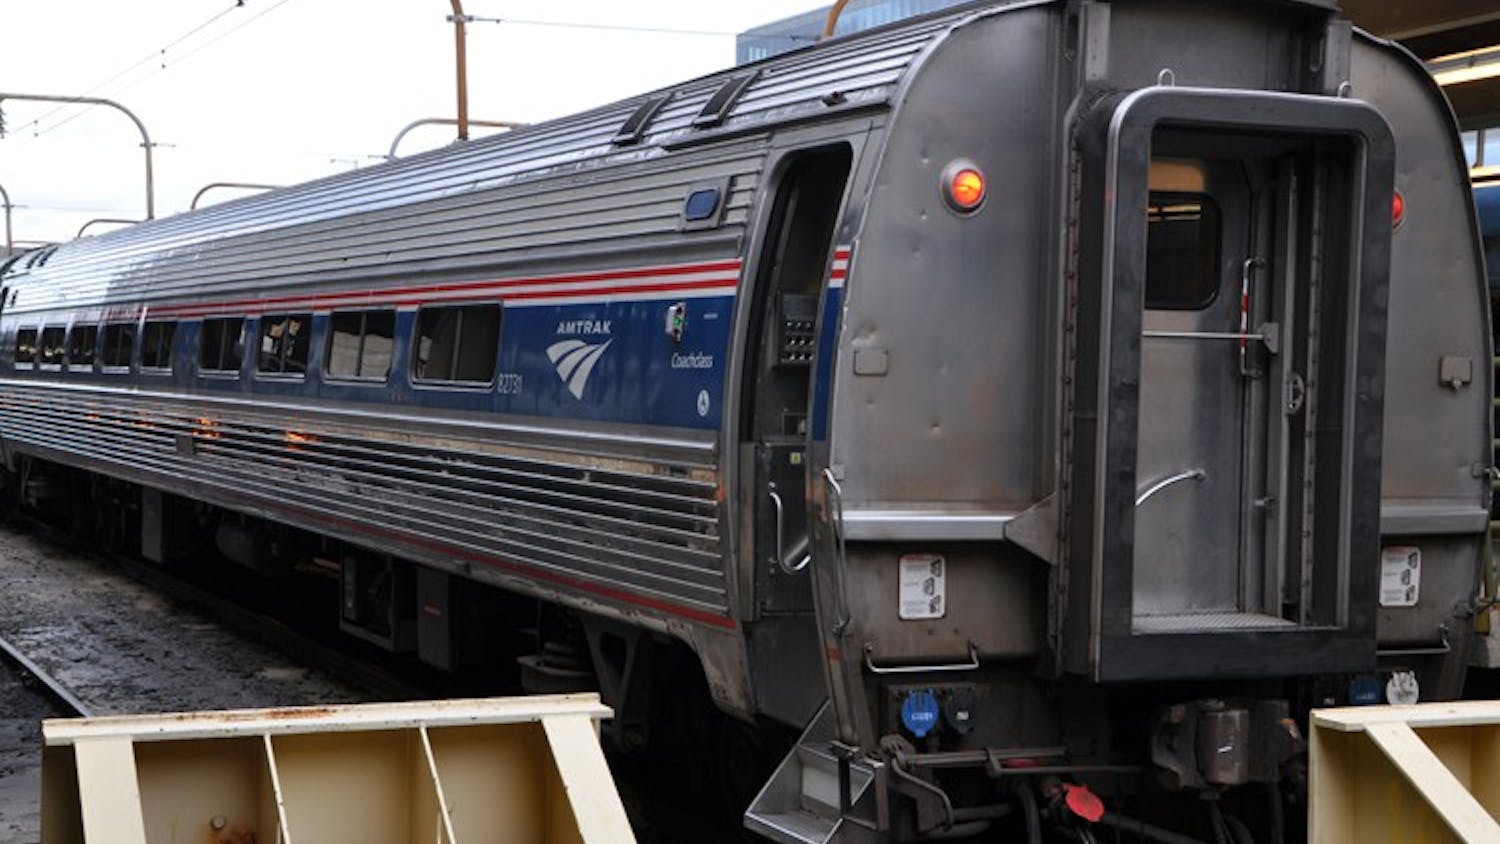 AMTRAK, GET YOUR GUN â€” A bill recently approved in the Senate could allow Amtrak passengers to carry guns in checked luggage on trains, as they could prior to 9/11. This bill will soon go to the House for a vote.